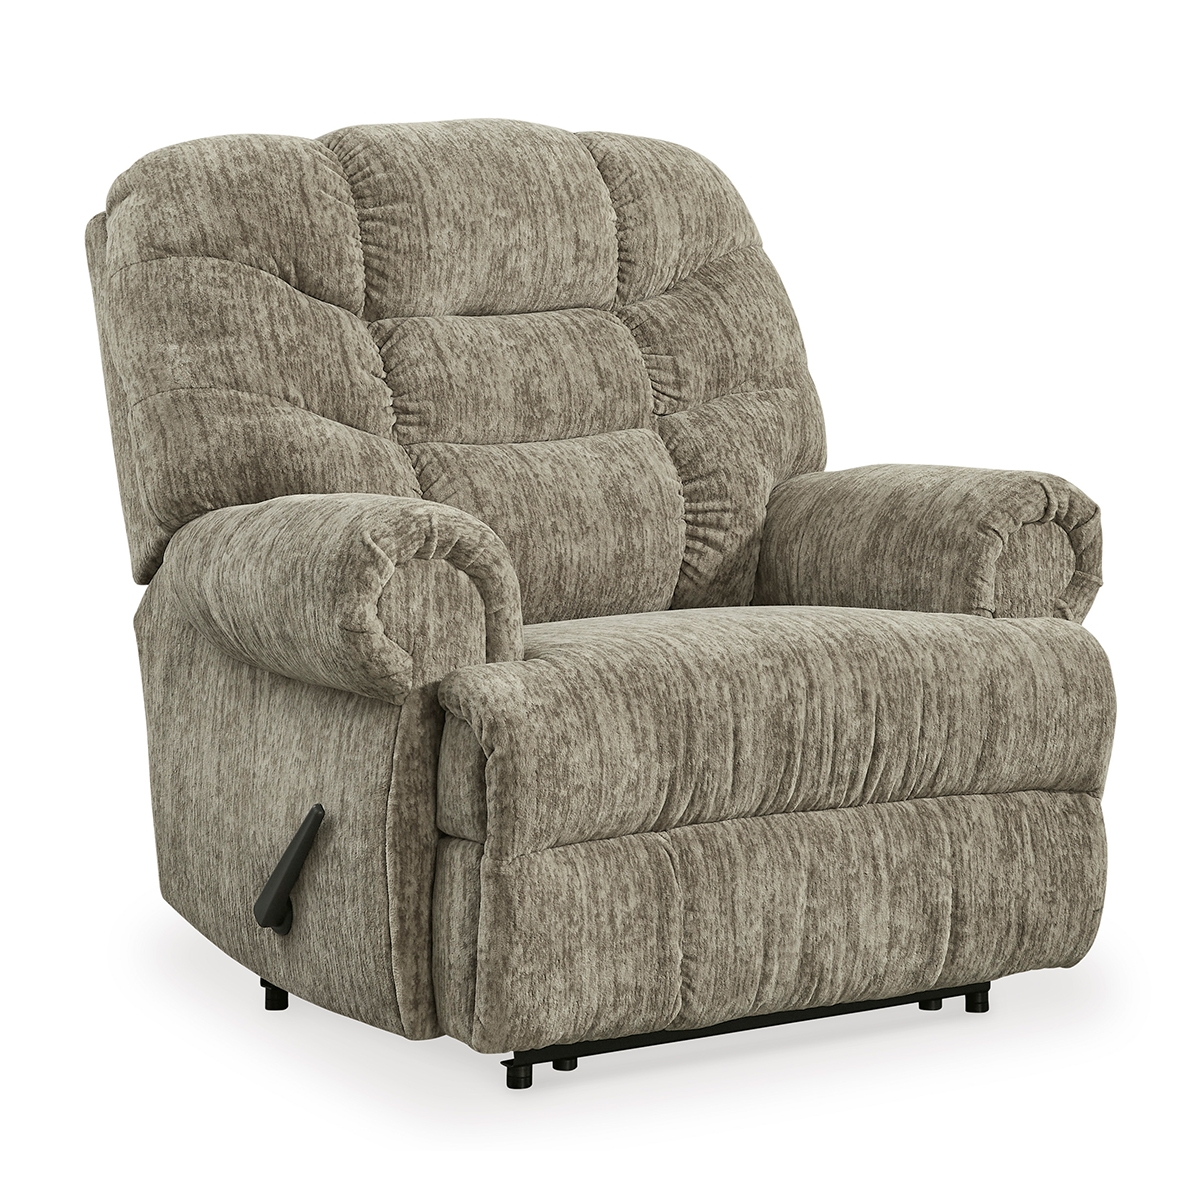 Picture of MAMMOTH TAN RECLINER